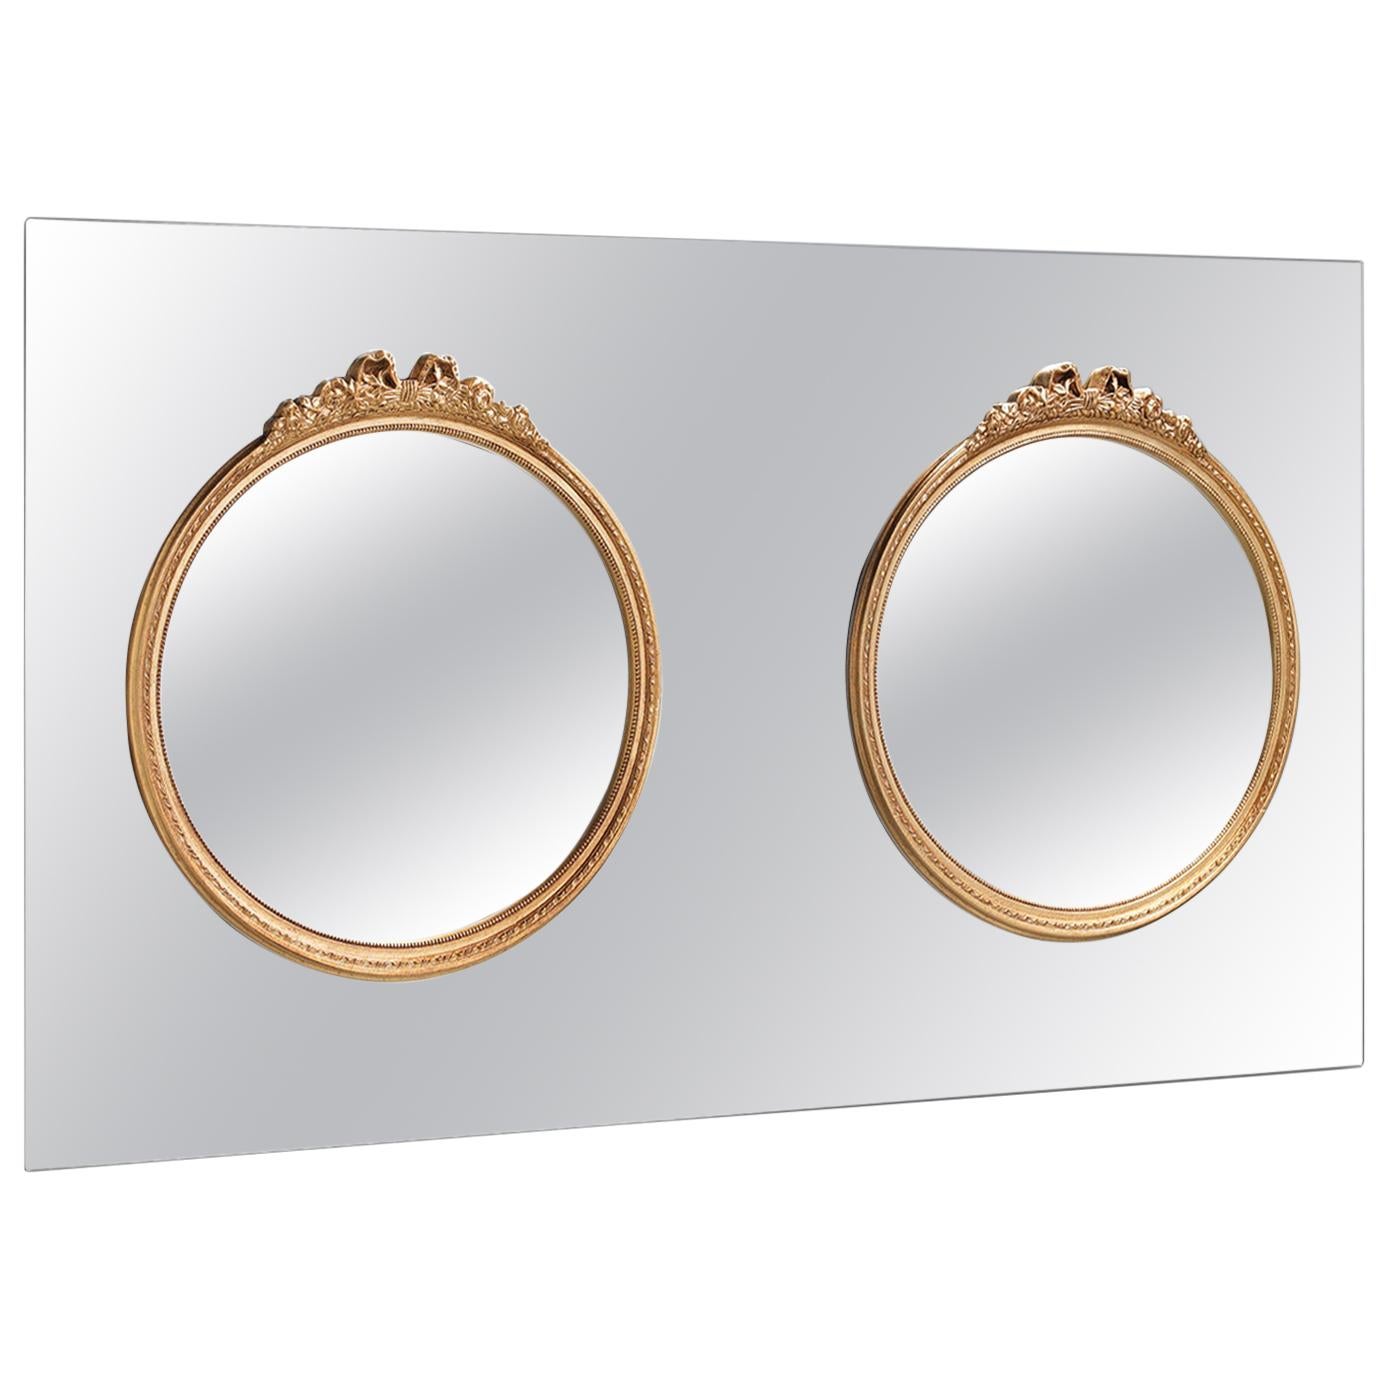 Wall mirror with wooden frame mounted directly on the mirror surface. Round frame, Baroque style, available in gold finish.
 